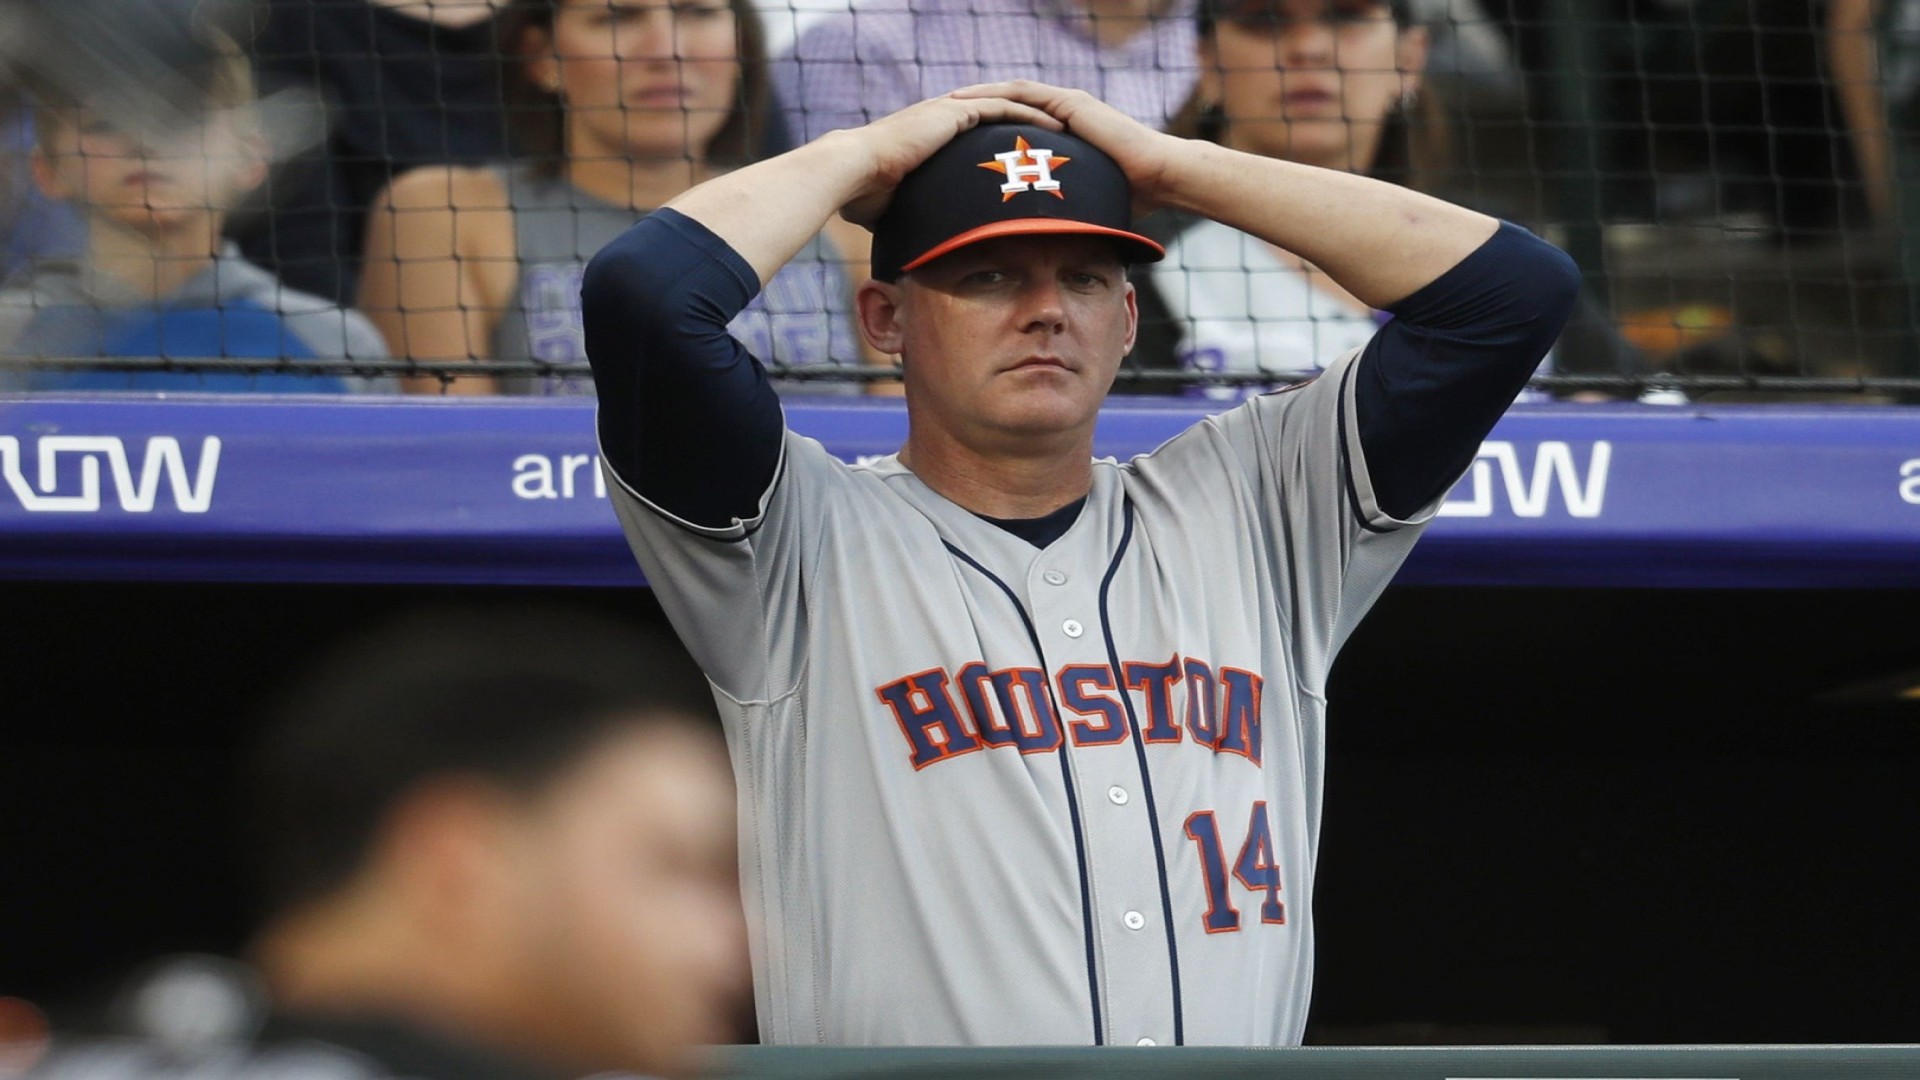 10 things we learned from ex-Astros manager AJ Hinch's first interview  after being fired following sign-stealing scandal